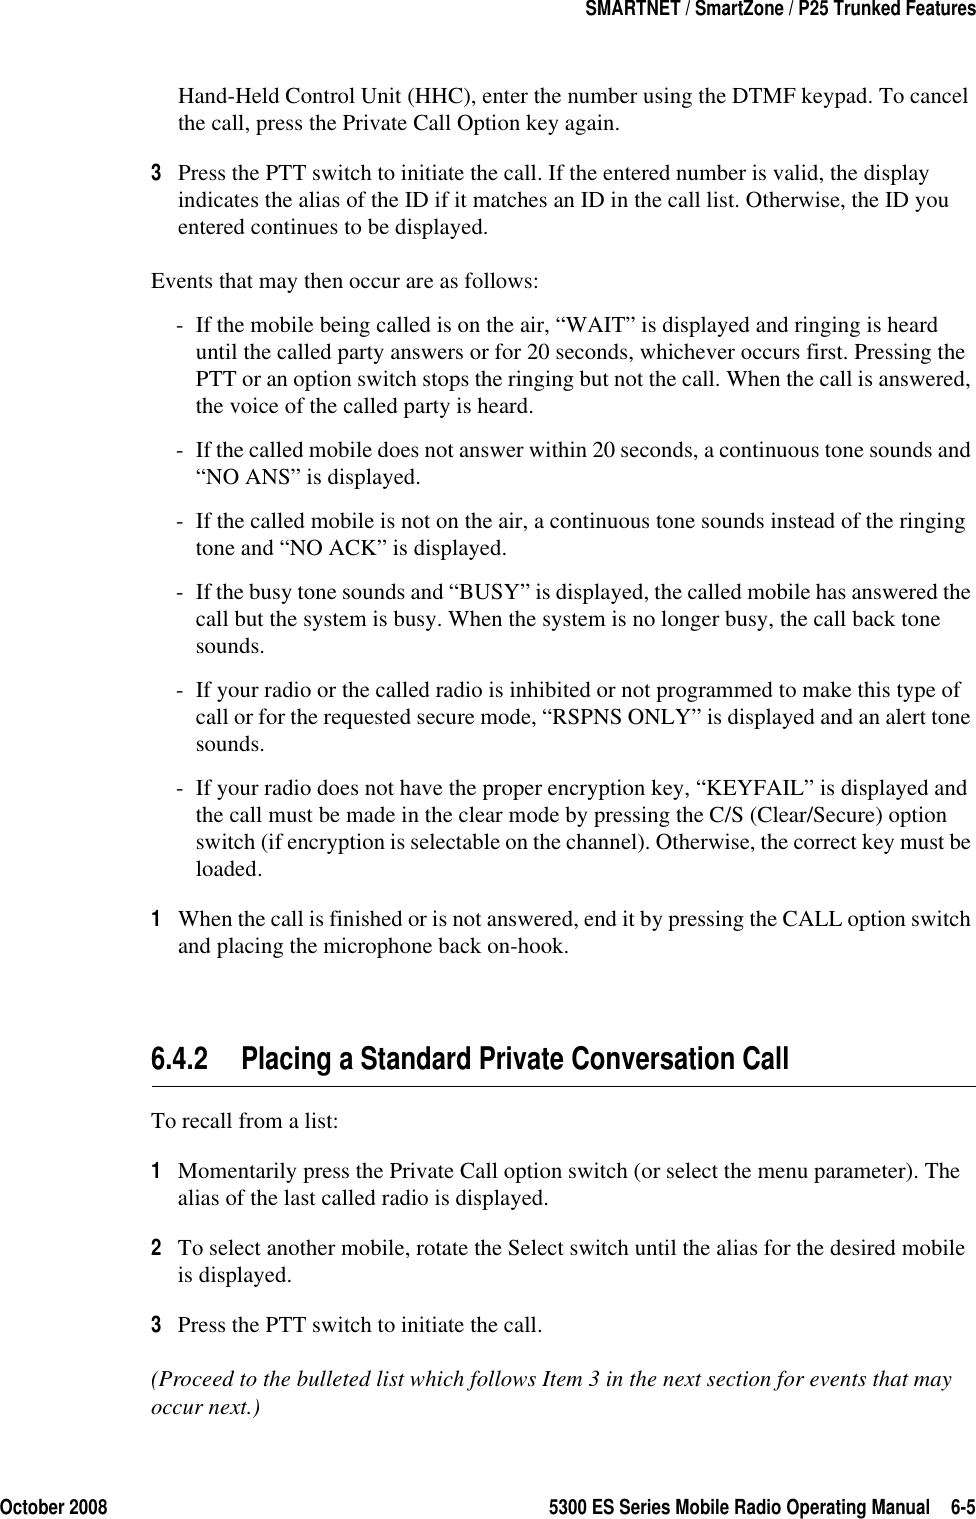 October 2008 5300 ES Series Mobile Radio Operating Manual 6-5SMARTNET / SmartZone / P25 Trunked FeaturesHand-Held Control Unit (HHC), enter the number using the DTMF keypad. To cancel the call, press the Private Call Option key again.3Press the PTT switch to initiate the call. If the entered number is valid, the display indicates the alias of the ID if it matches an ID in the call list. Otherwise, the ID you entered continues to be displayed.Events that may then occur are as follows: - If the mobile being called is on the air, “WAIT” is displayed and ringing is heard until the called party answers or for 20 seconds, whichever occurs first. Pressing the PTT or an option switch stops the ringing but not the call. When the call is answered, the voice of the called party is heard.- If the called mobile does not answer within 20 seconds, a continuous tone sounds and “NO ANS” is displayed.- If the called mobile is not on the air, a continuous tone sounds instead of the ringing tone and “NO ACK” is displayed.- If the busy tone sounds and “BUSY” is displayed, the called mobile has answered the call but the system is busy. When the system is no longer busy, the call back tone sounds.- If your radio or the called radio is inhibited or not programmed to make this type of call or for the requested secure mode, “RSPNS ONLY” is displayed and an alert tone sounds.- If your radio does not have the proper encryption key, “KEYFAIL” is displayed and the call must be made in the clear mode by pressing the C/S (Clear/Secure) option switch (if encryption is selectable on the channel). Otherwise, the correct key must be loaded.1When the call is finished or is not answered, end it by pressing the CALL option switch and placing the microphone back on-hook.6.4.2 Placing a Standard Private Conversation CallTo recall from a list:1Momentarily press the Private Call option switch (or select the menu parameter). The alias of the last called radio is displayed.2To select another mobile, rotate the Select switch until the alias for the desired mobile is displayed. 3Press the PTT switch to initiate the call.(Proceed to the bulleted list which follows Item 3 in the next section for events that may occur next.) 